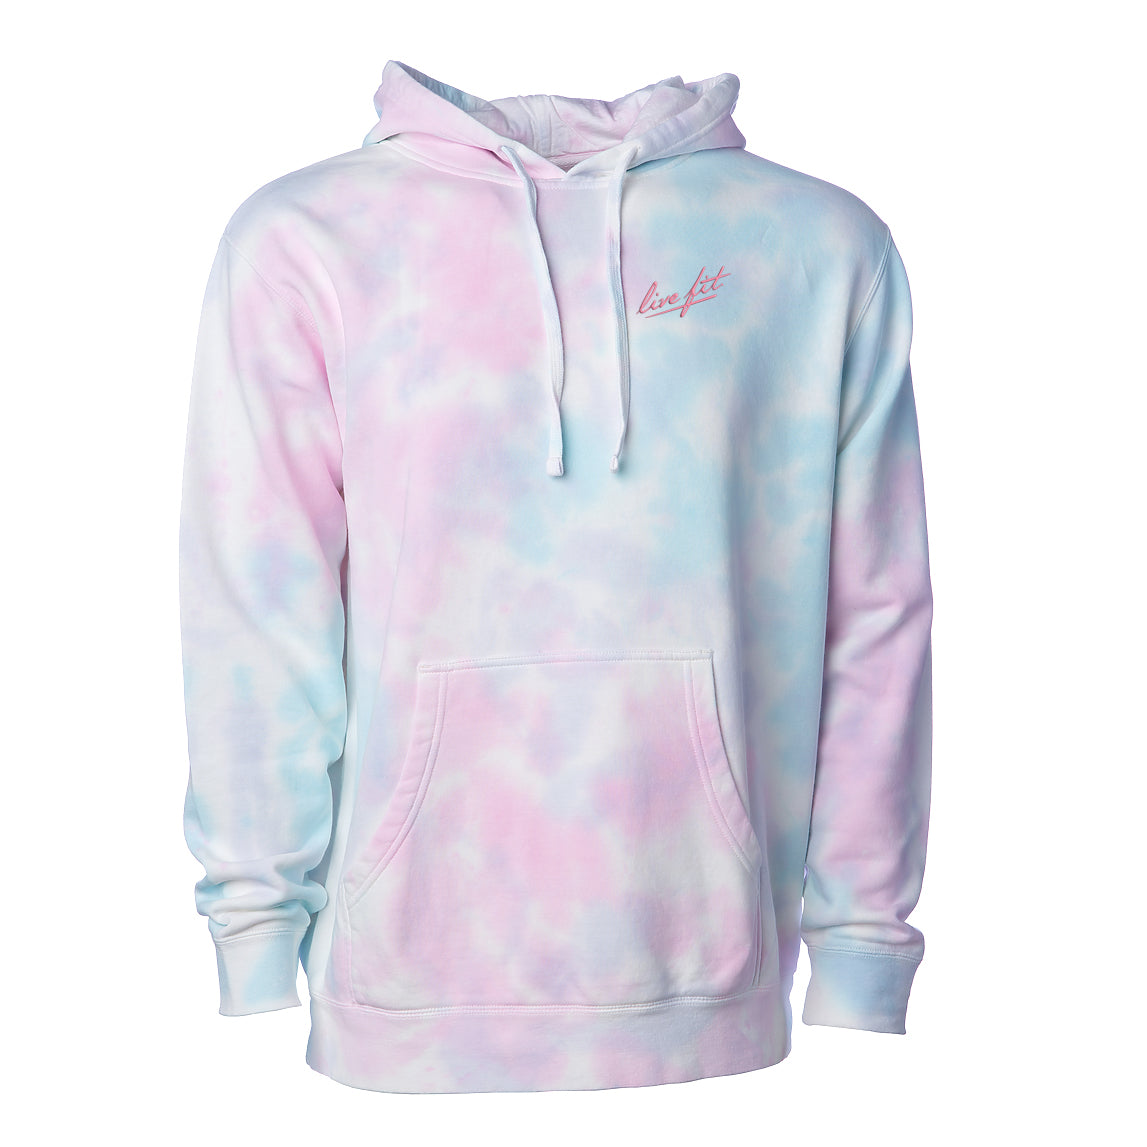 Cotton Candy Hoodie - Pink - Live Fit. Apparel